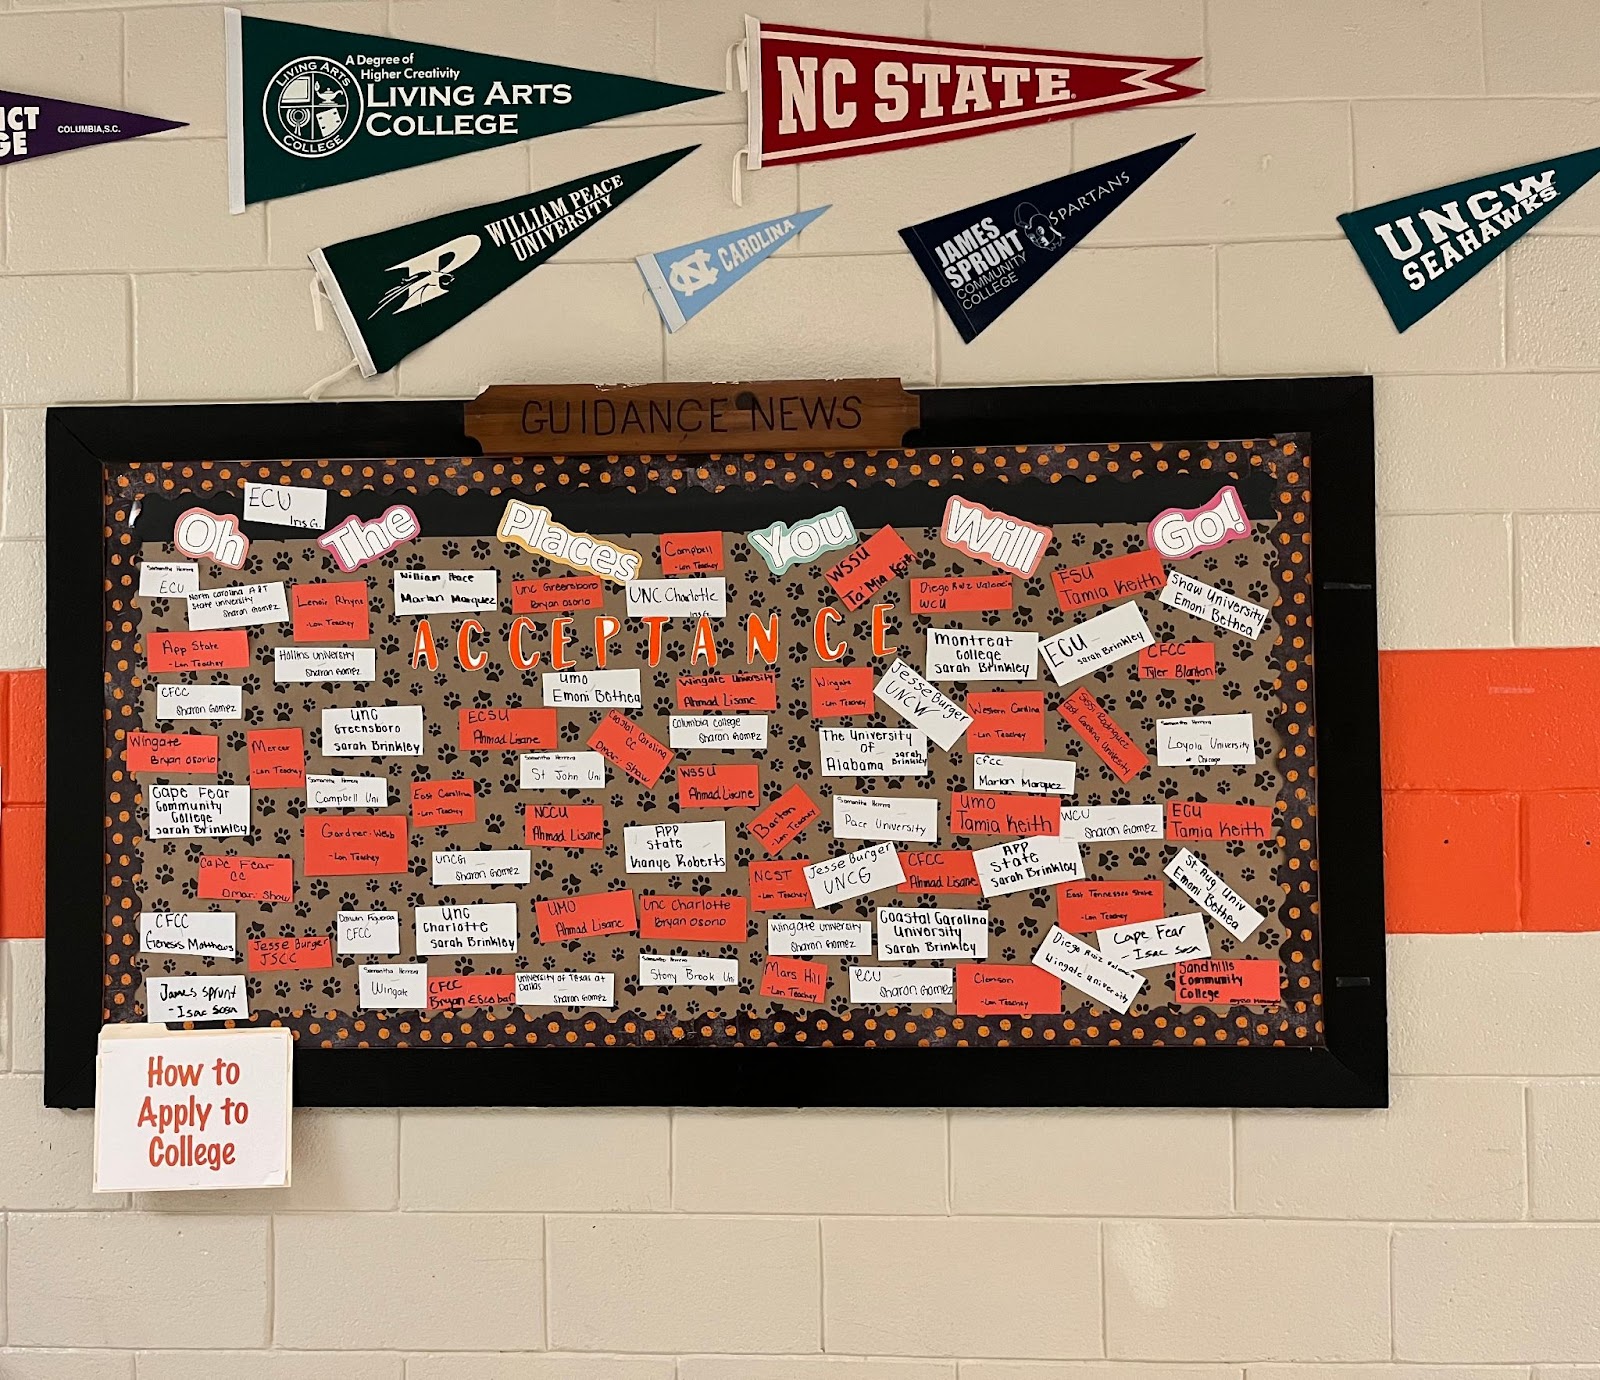 A bulletin board covered in pennants and other items from different colleges and universities